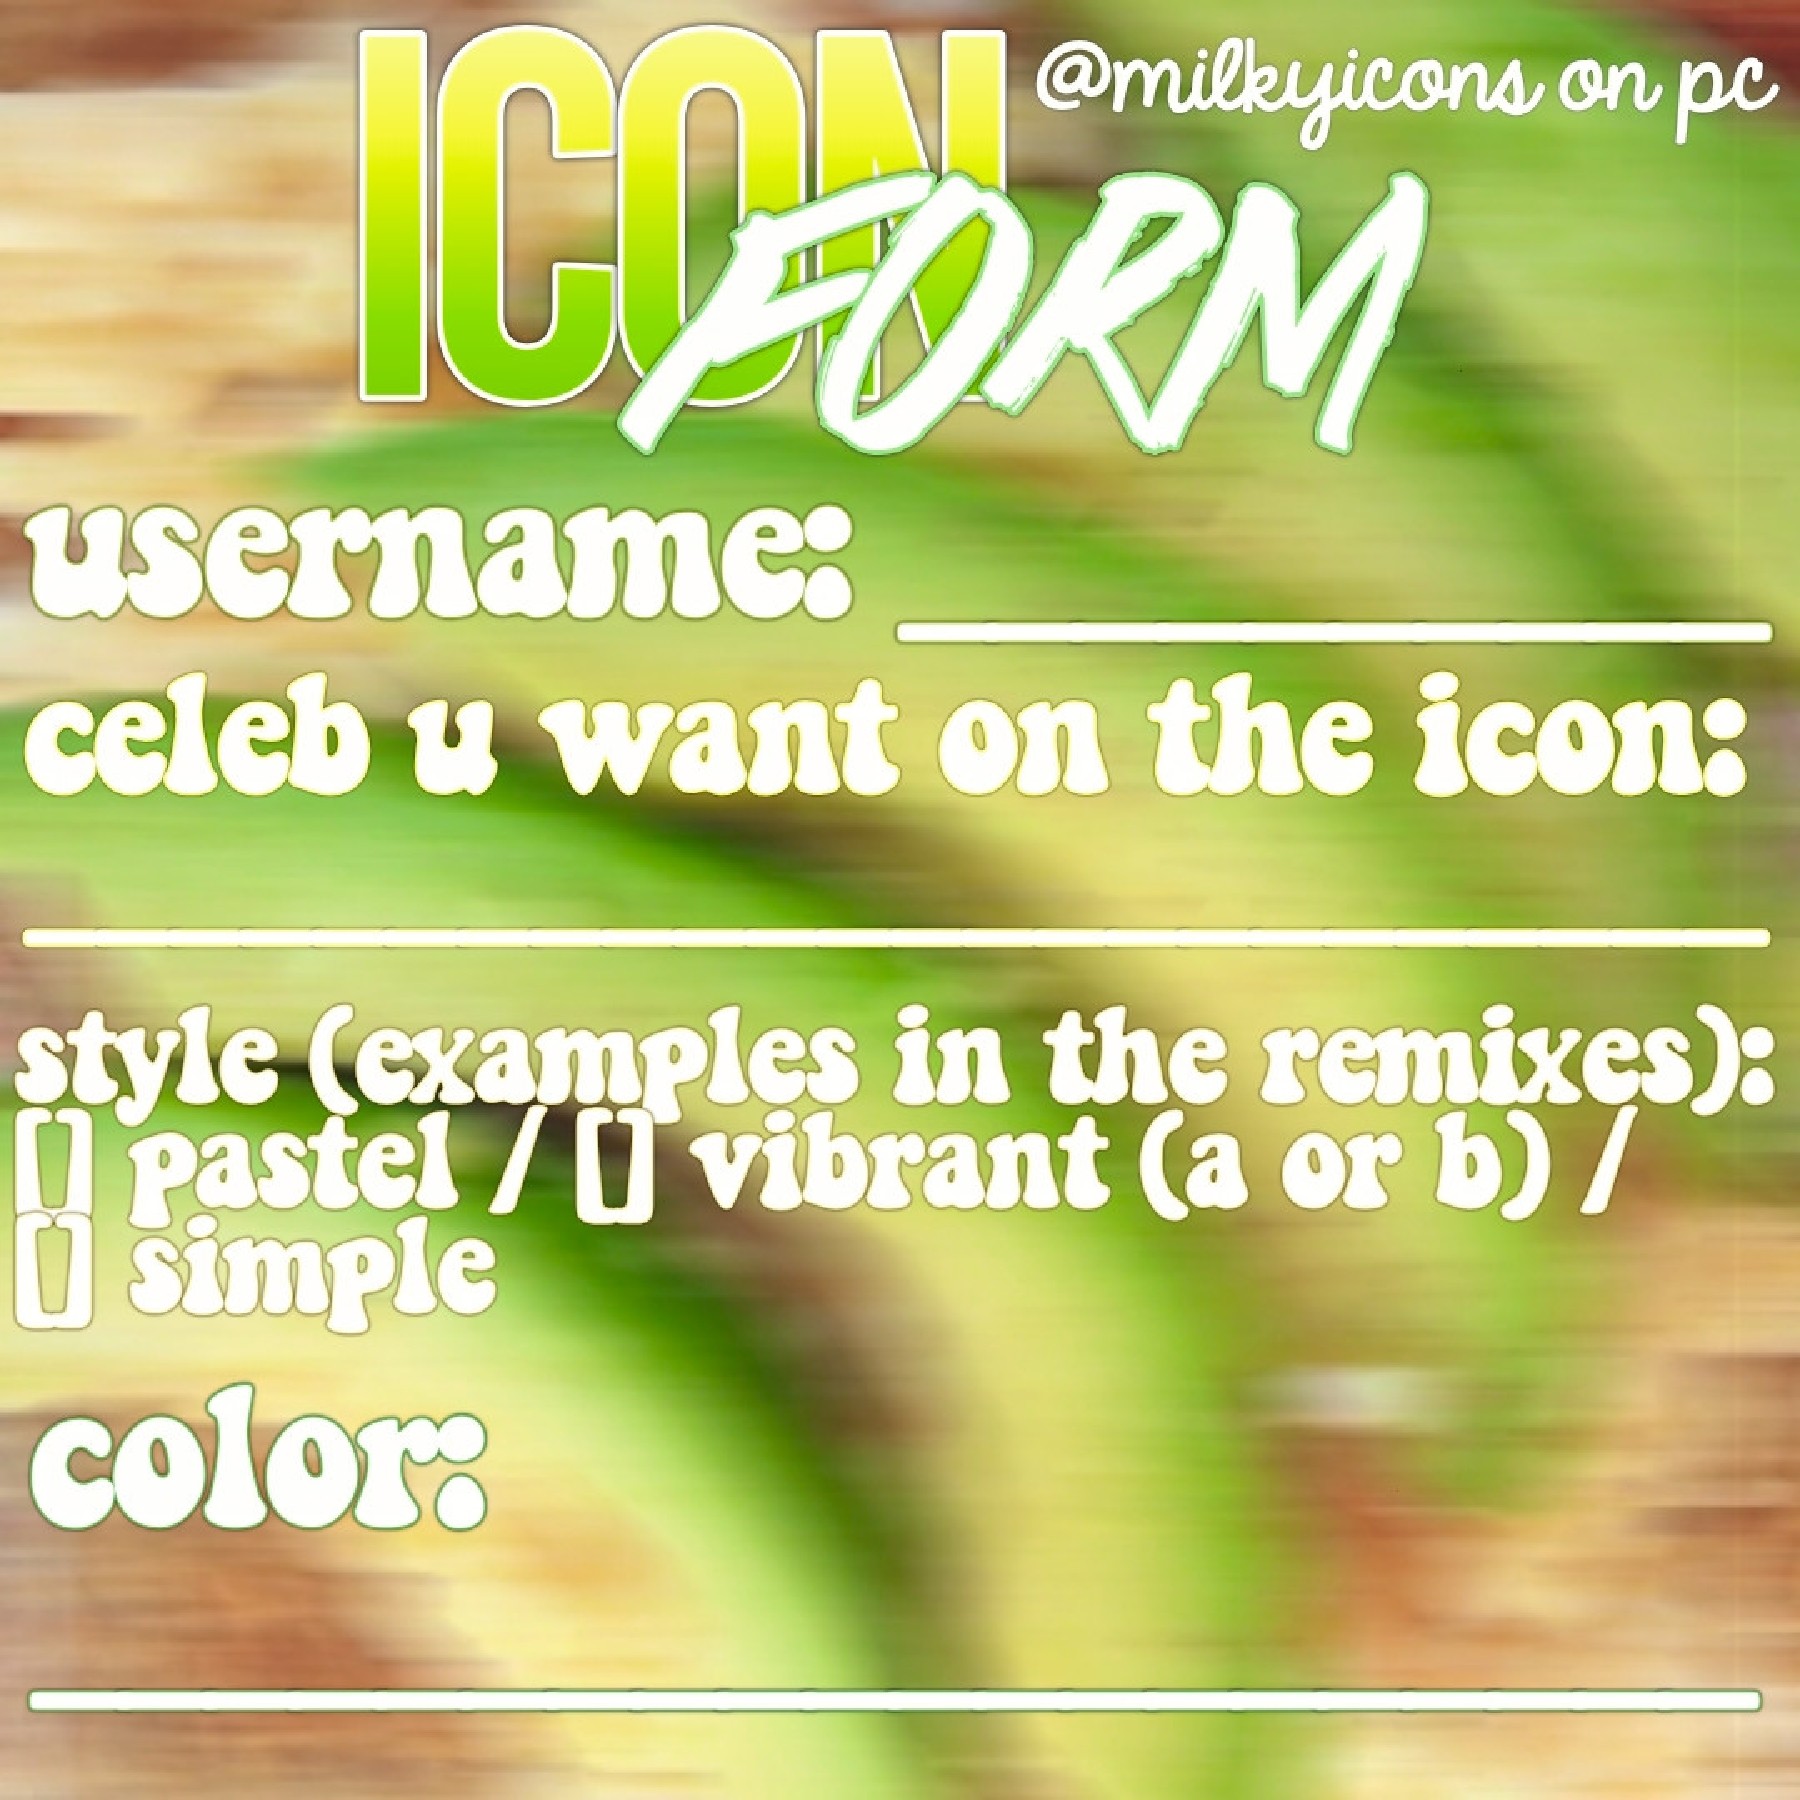 here's the icon form! check remixes, you'll find the 4 icon styles i'll be doing and u can pick the one you prefer for you own icon!💕pls comment if there's anything specific you want/don't want on it😊